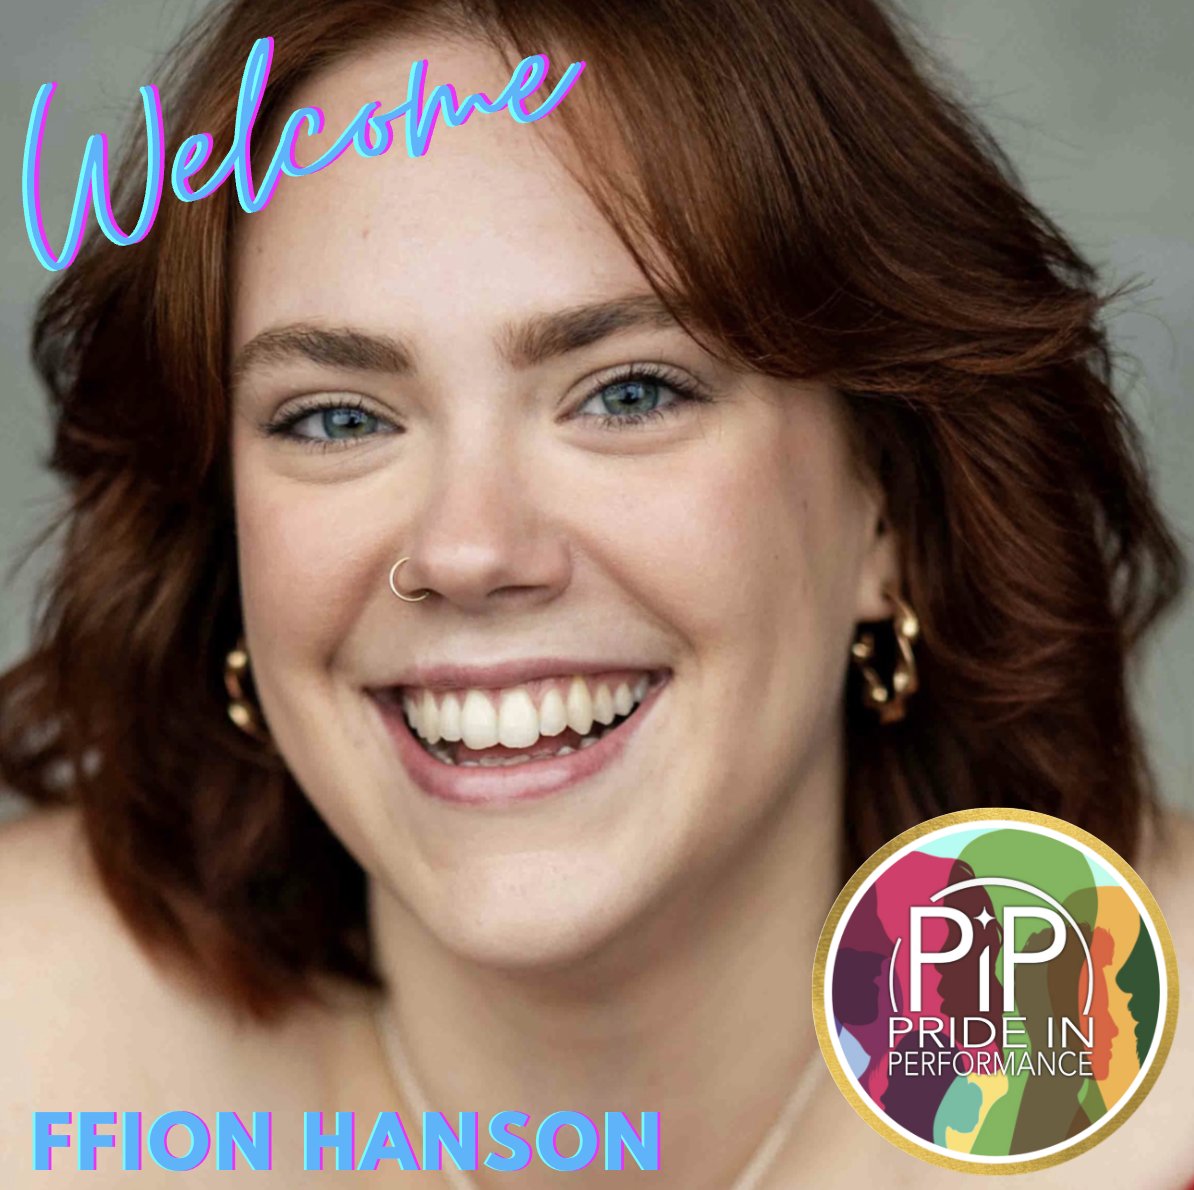 ⭐️PLEASE JOIN US IN WELCOMING FFION HANSON ⭐️ @ffionhansonxx to #ThePiPster Family! We're delighted to have her on board so please check out her CV and wish her many congratulations! app.spotlight.com/3415-6723-0214 #PositivelyPiP #ActorsLife #NewActor